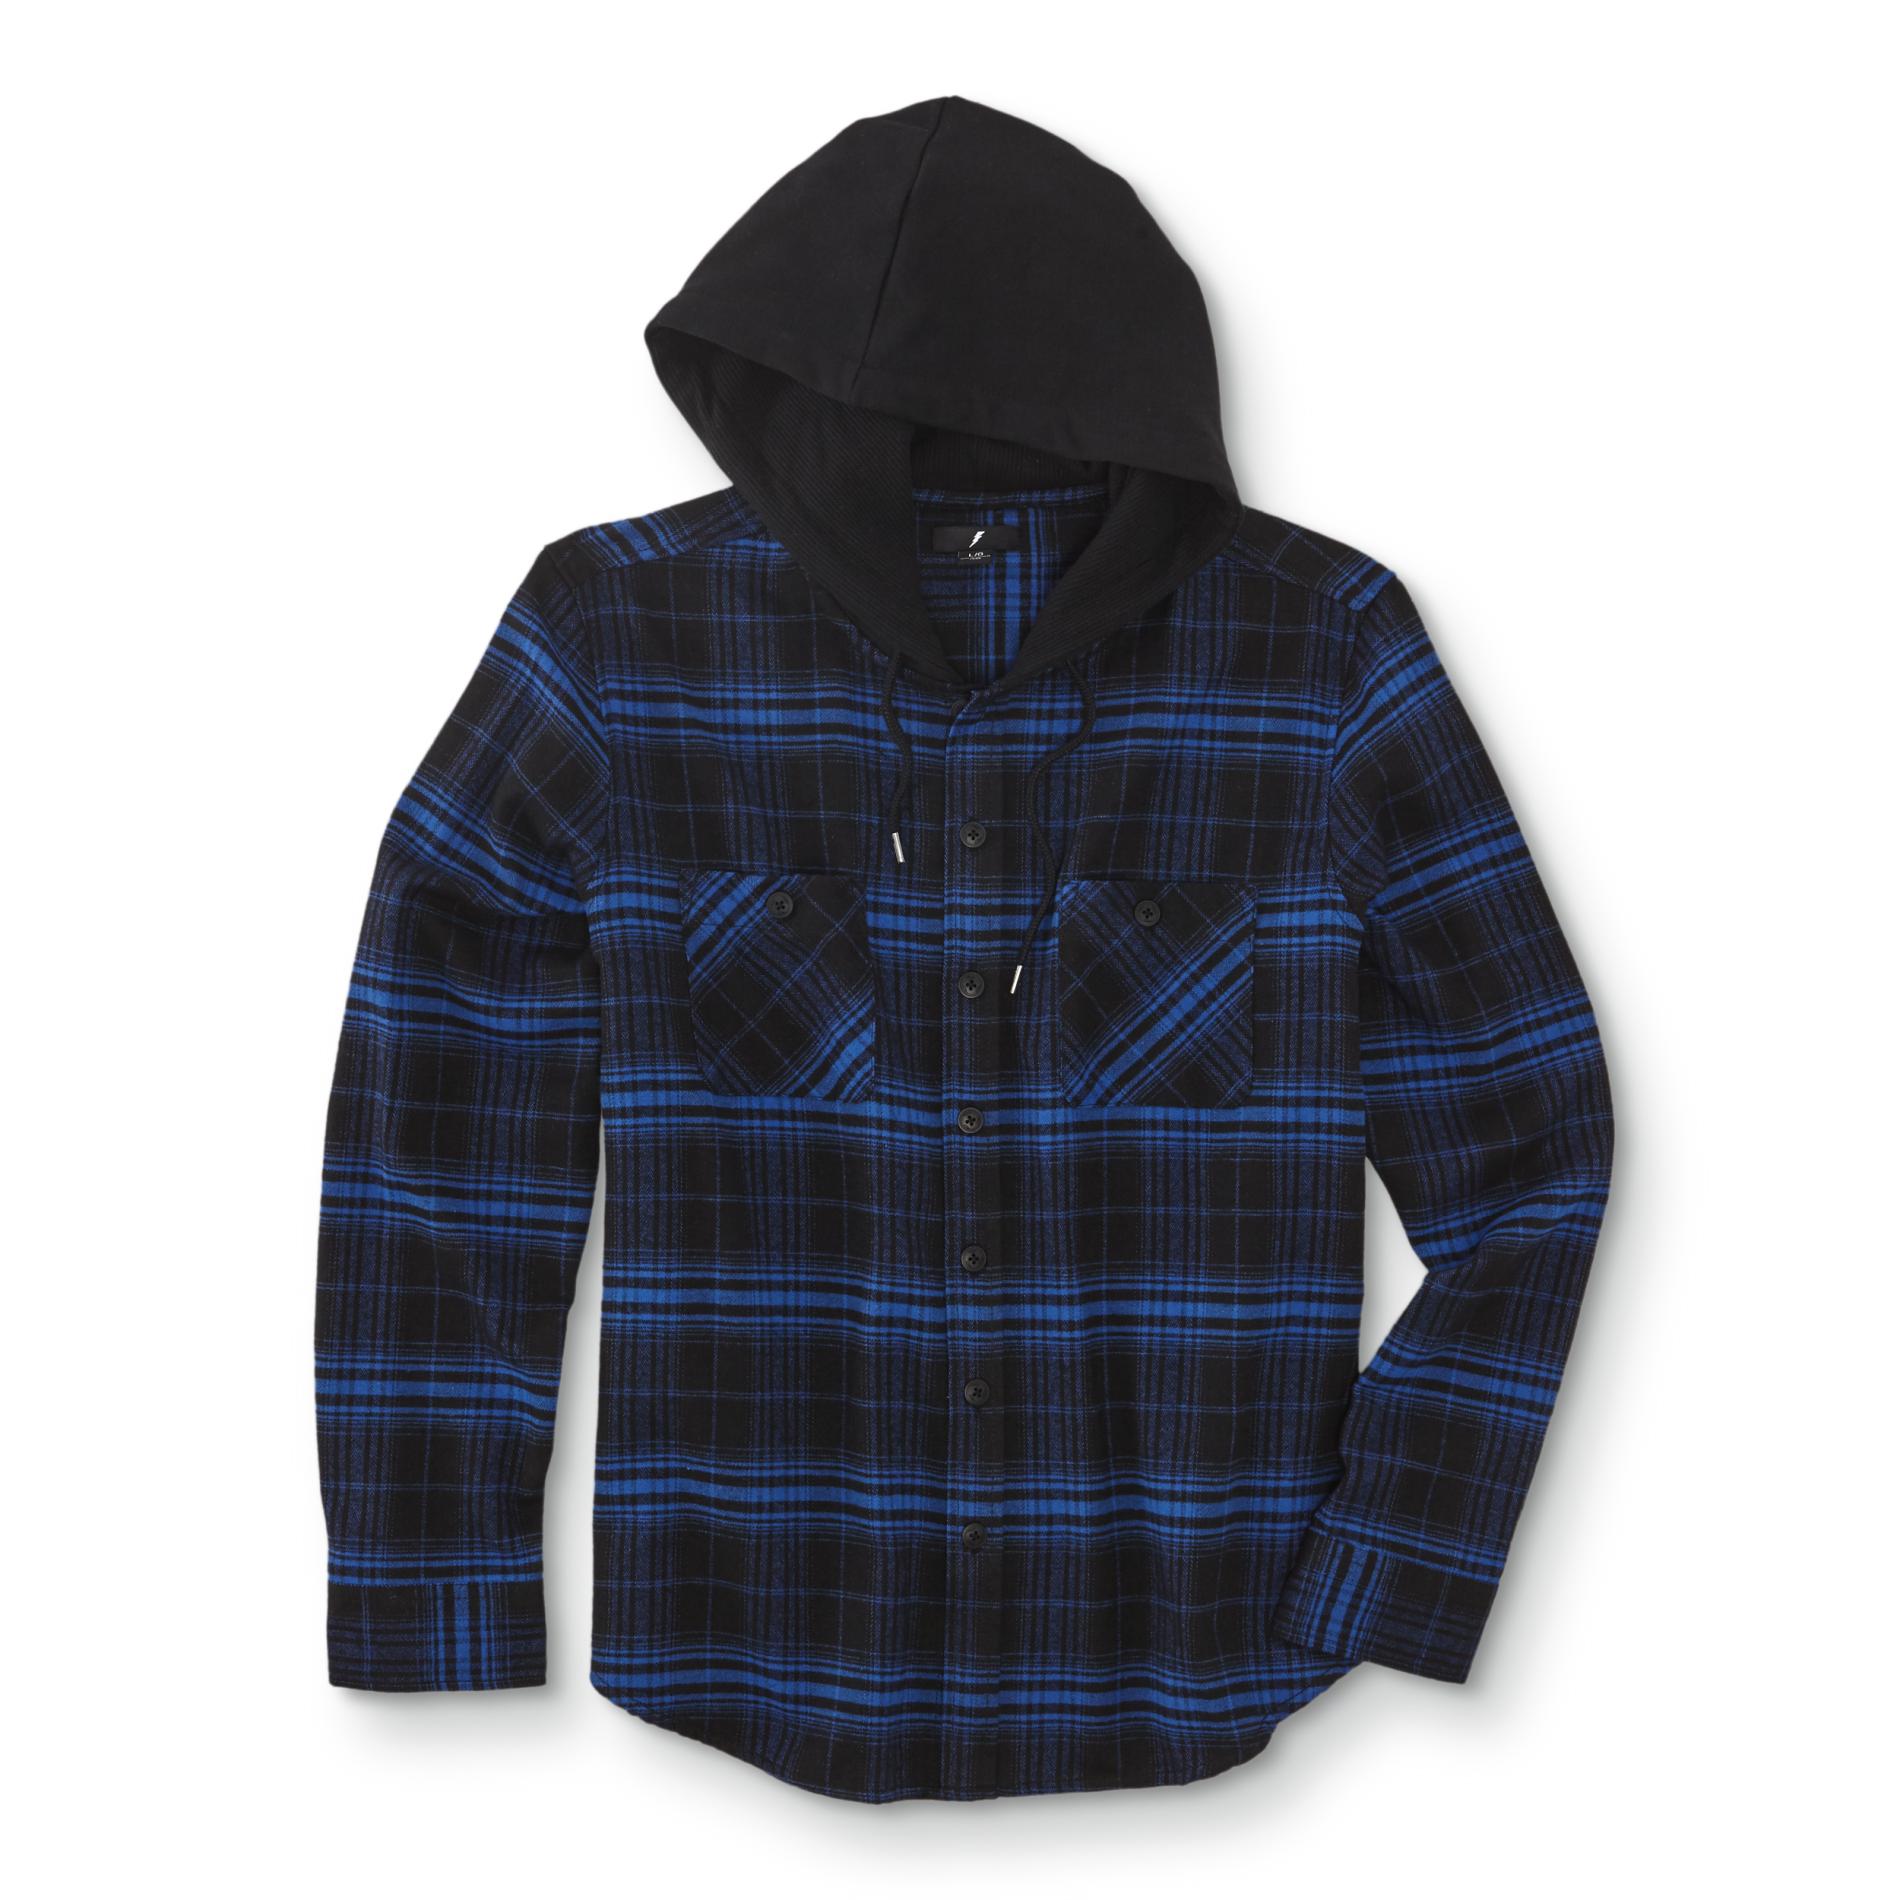 Amplify Young Men's Hooded Flannel Shirt - Plaid